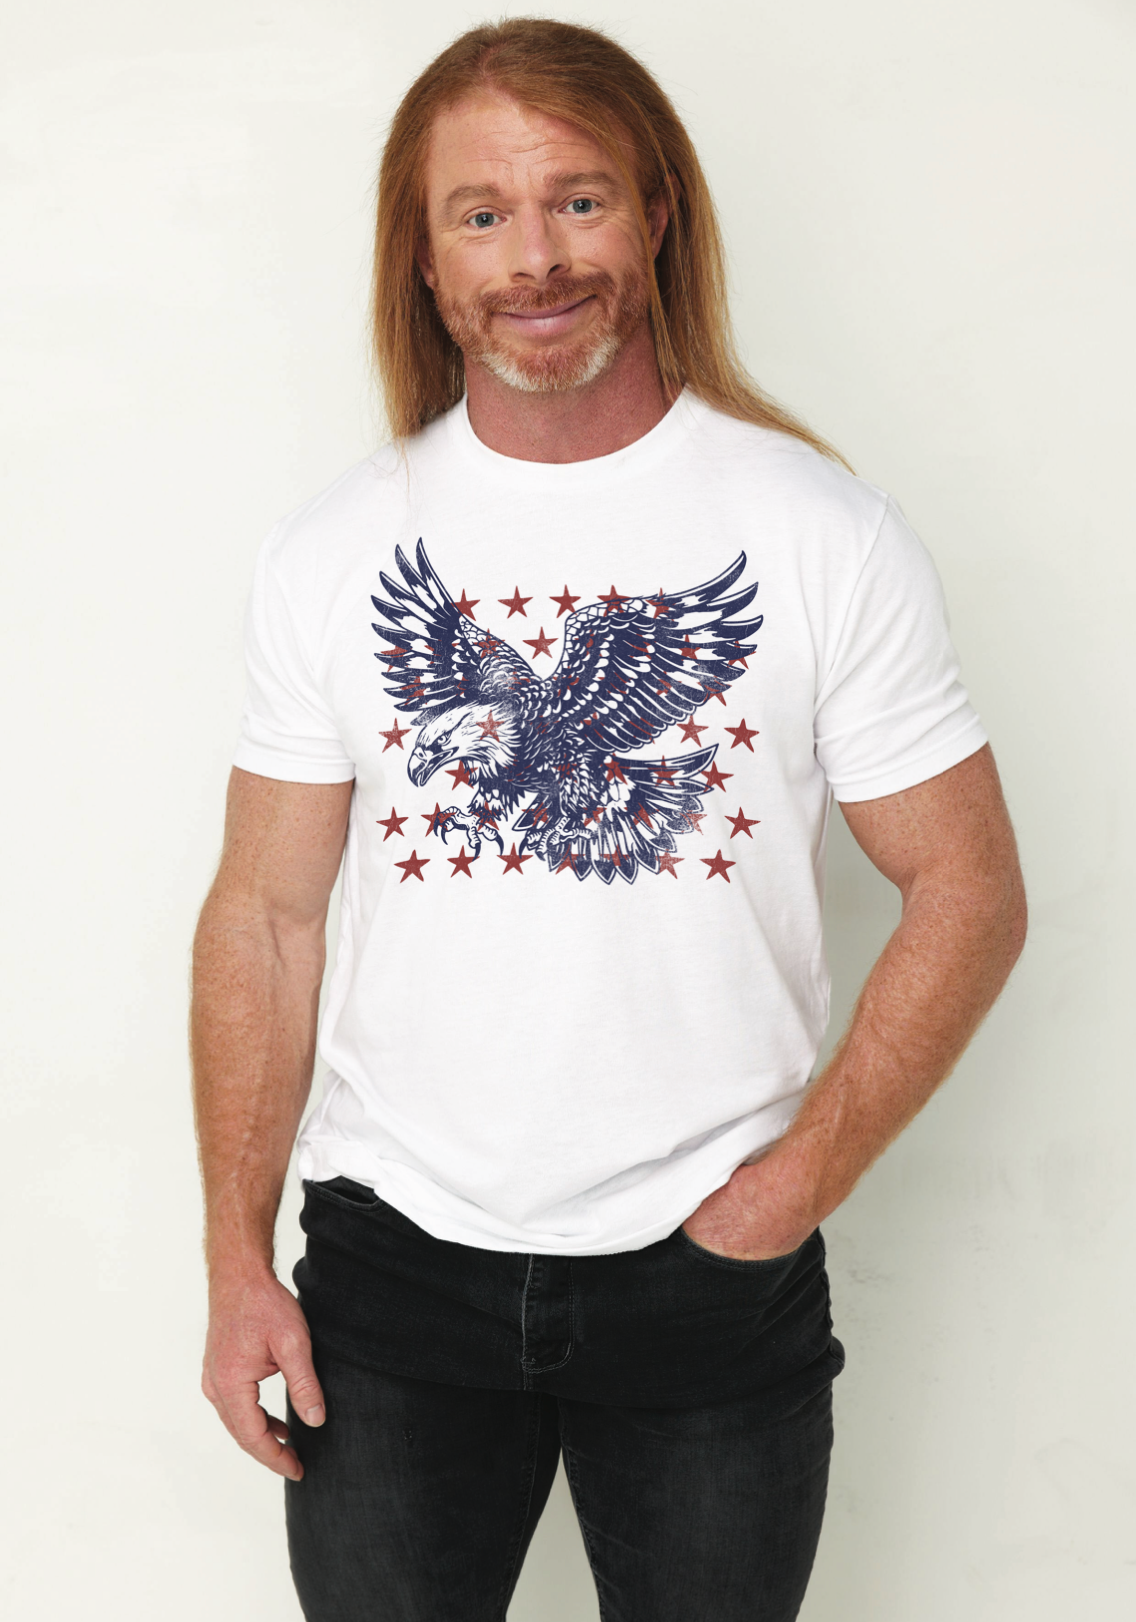 LIMITED EDITION DROP: Soaring Freedom T-Shirt